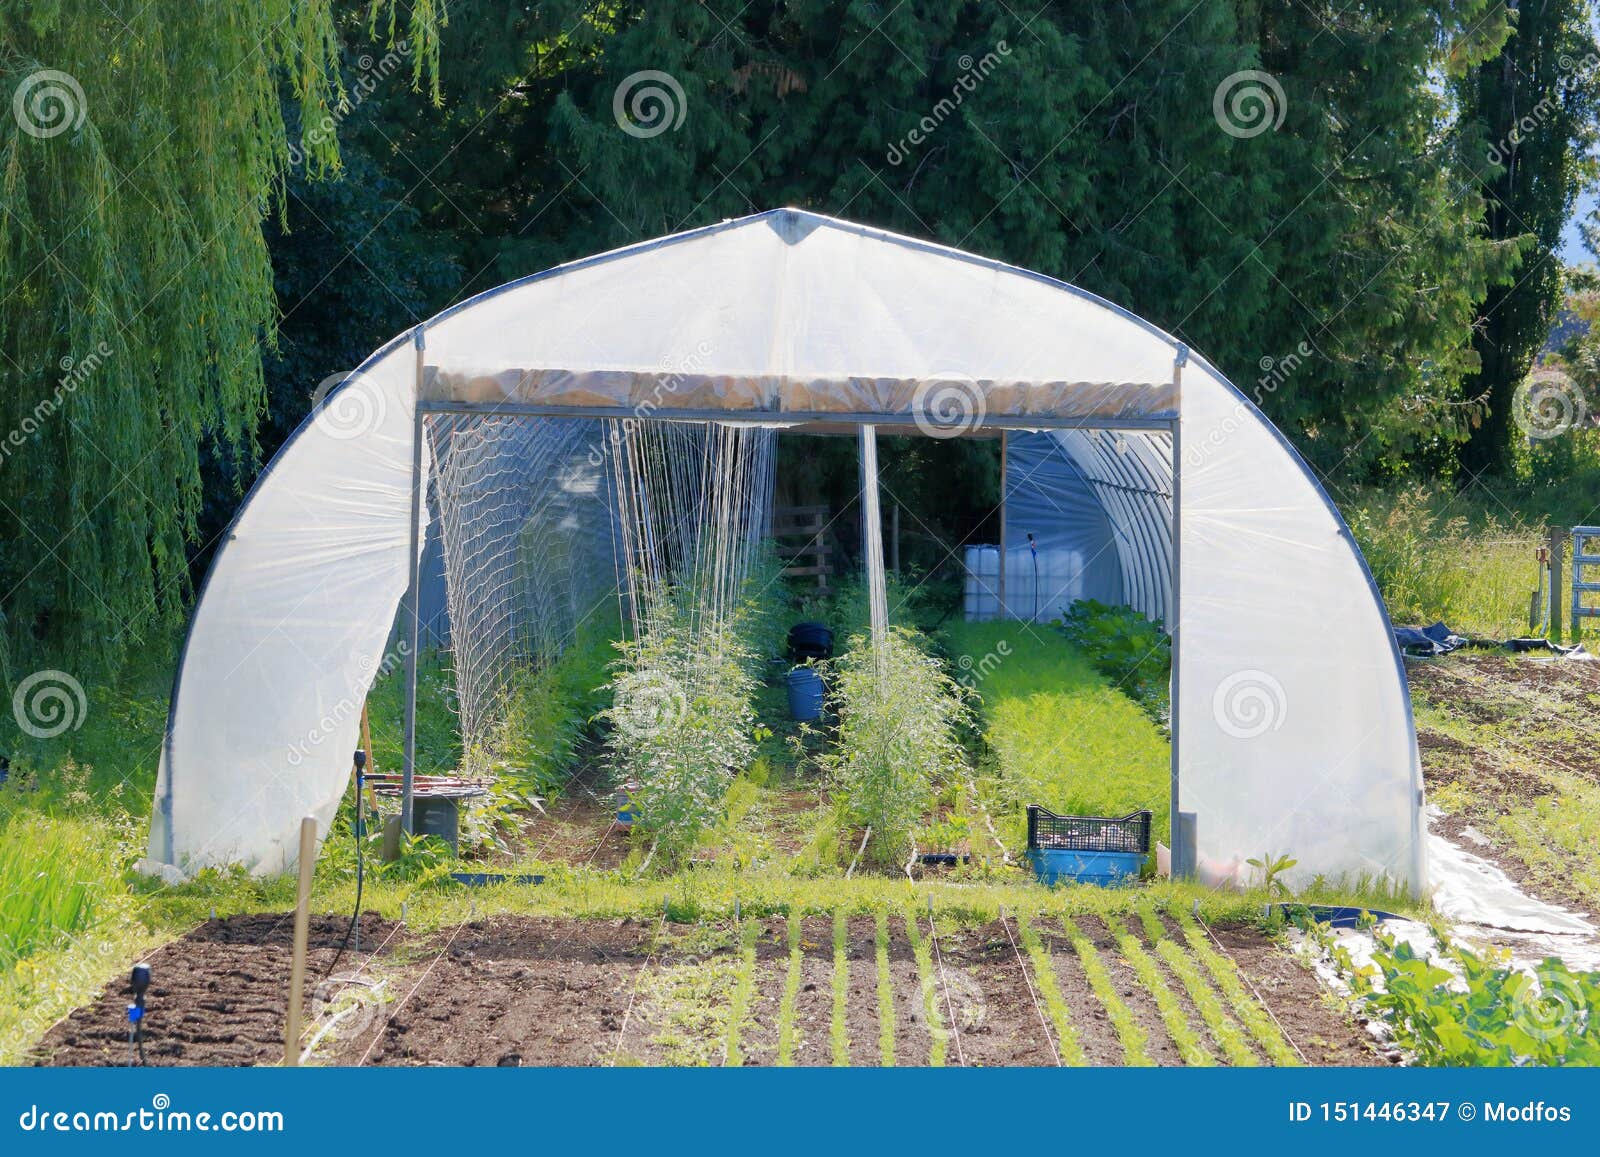 Personal Home Garden Greenhouse Stock Image Image Of Open Greenhouse 151446347